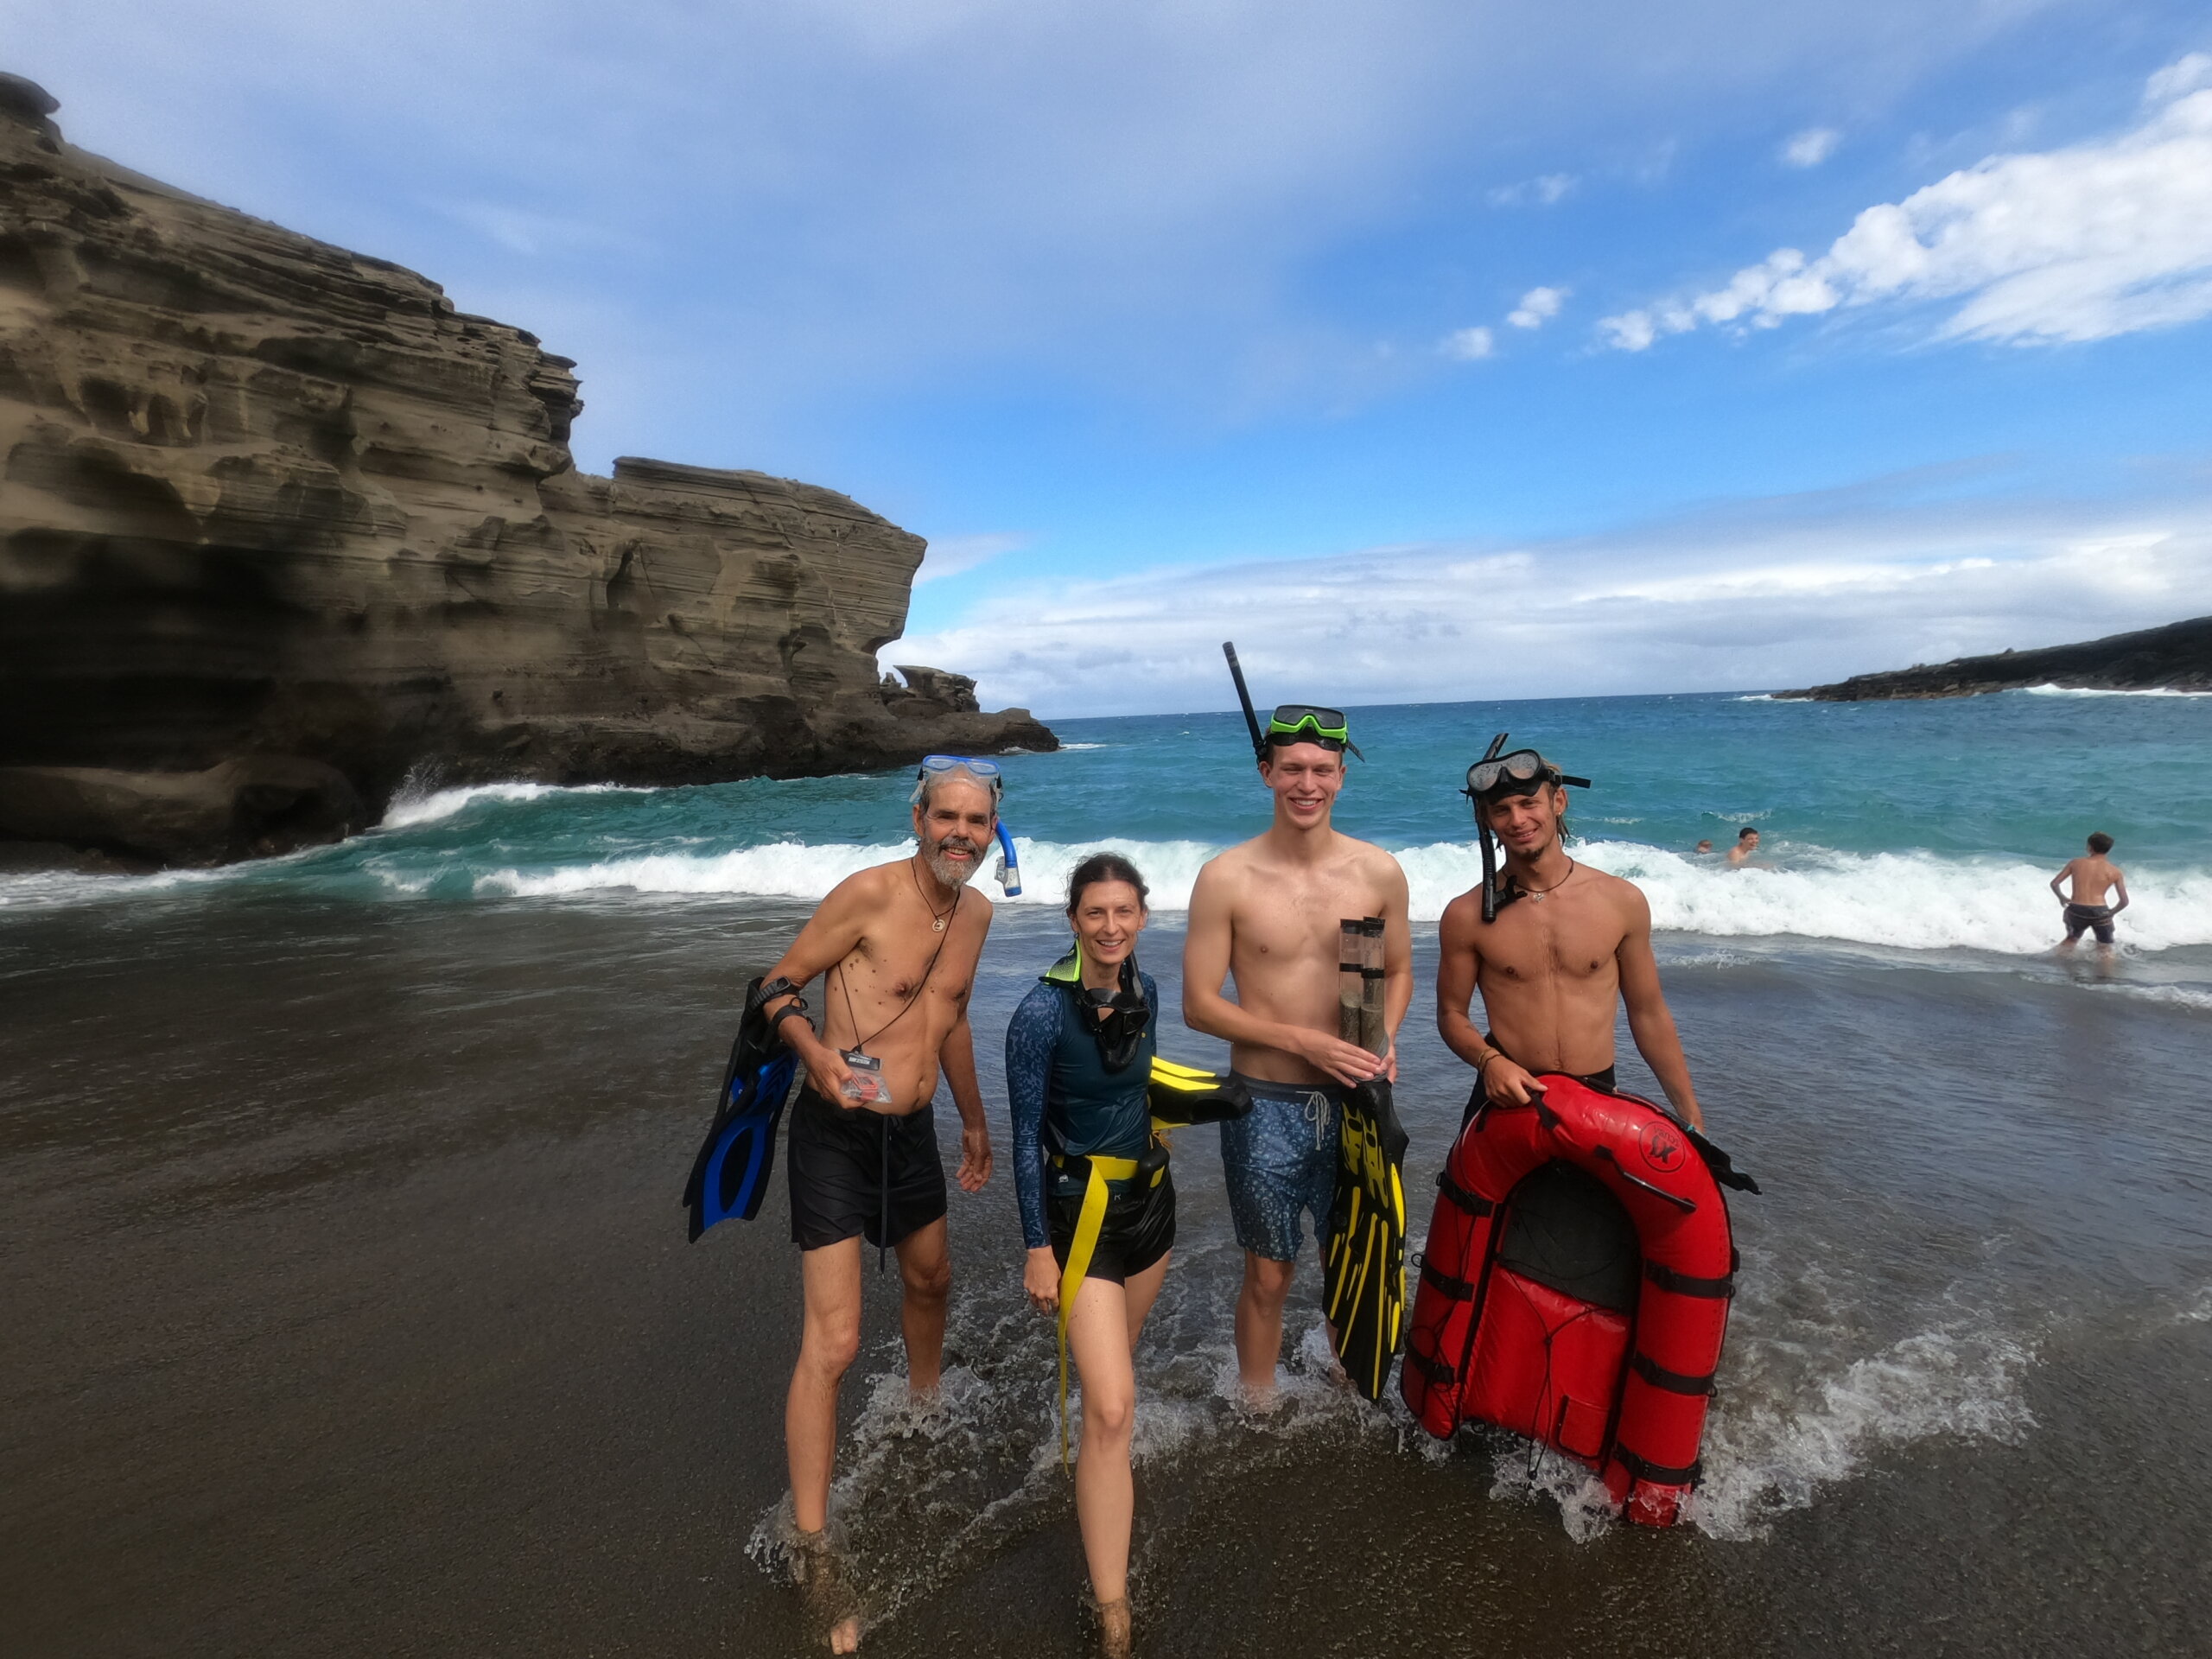 A group of researchers, including a Cal Poly professor and two students, pause after an underwater dive in Hawaii